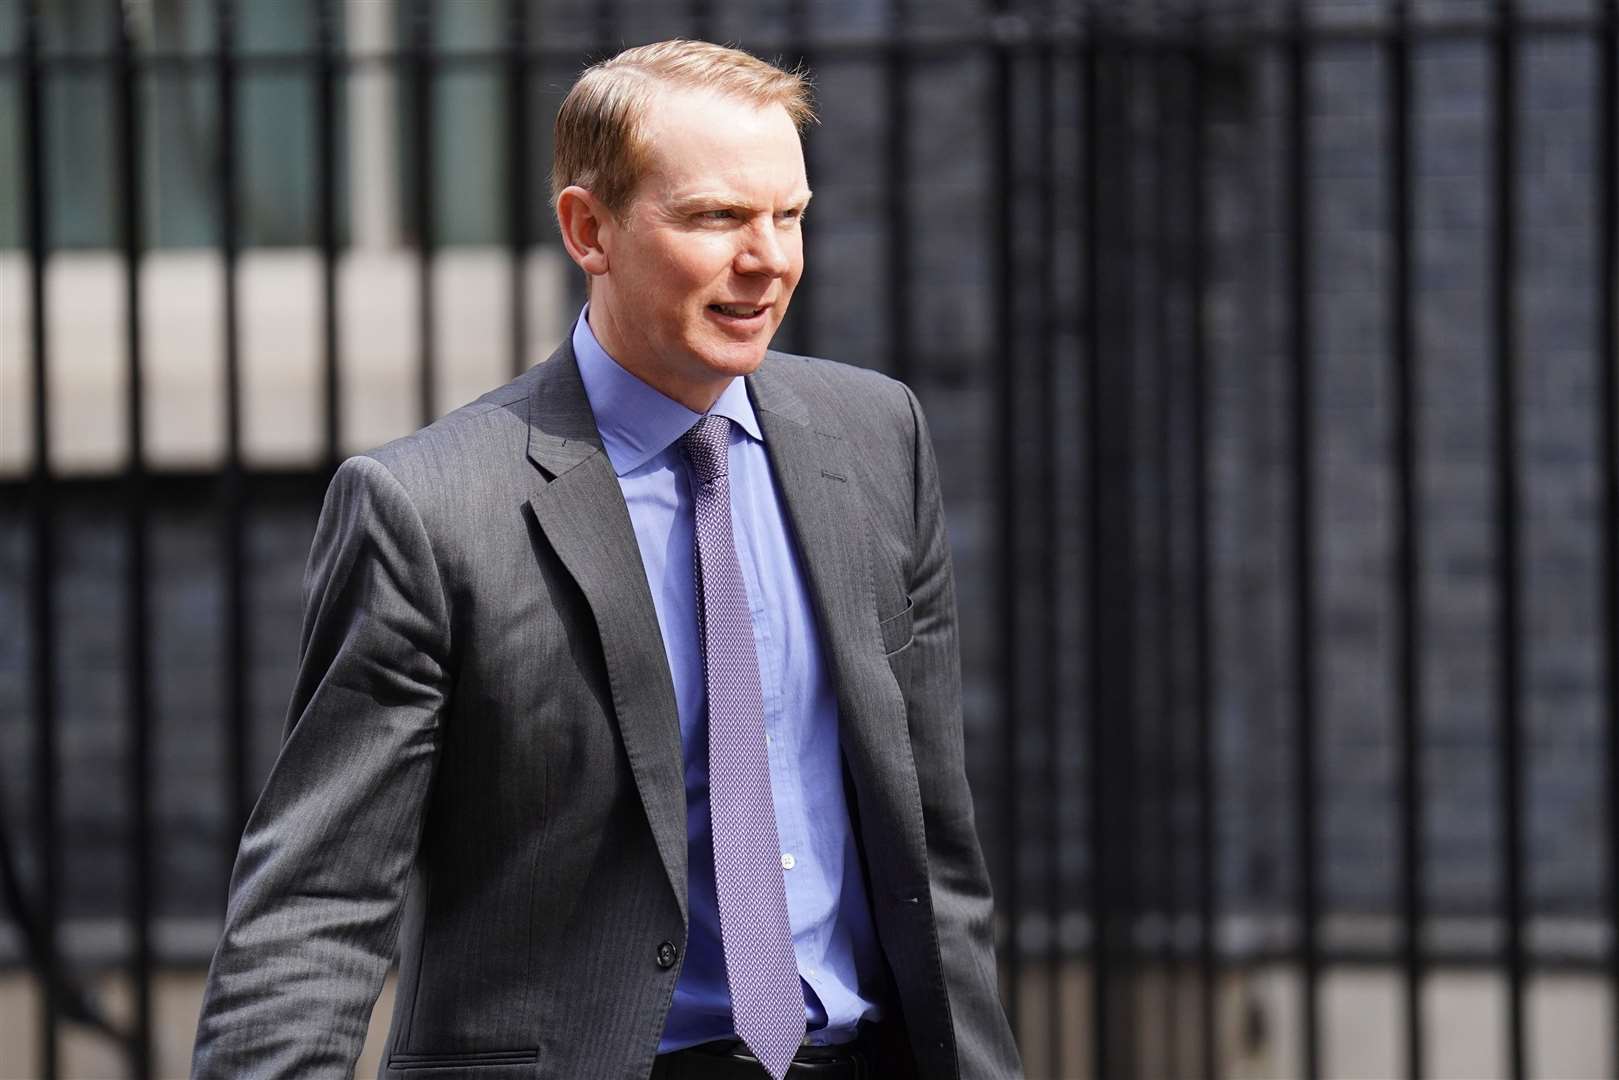 Charlie Nunn, Managing Director of Lloyds Banking Group, arrives at 11 Downing Street in London (James Manning/PA)